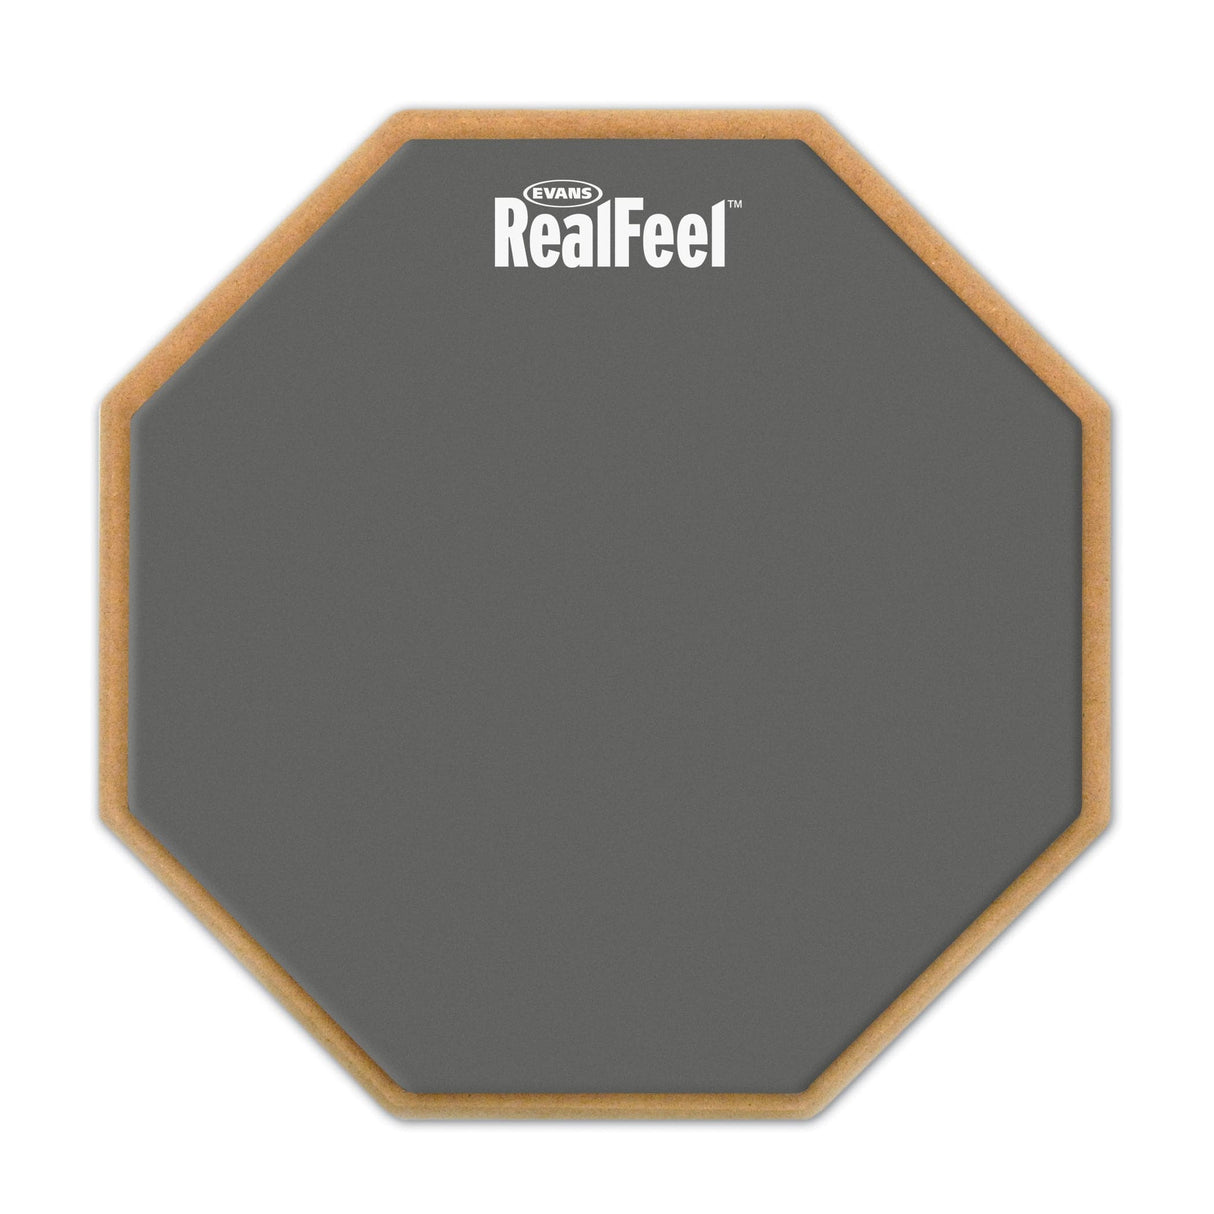 RealFeel by Evans 2-Sided Practice Pad, 6 Inch